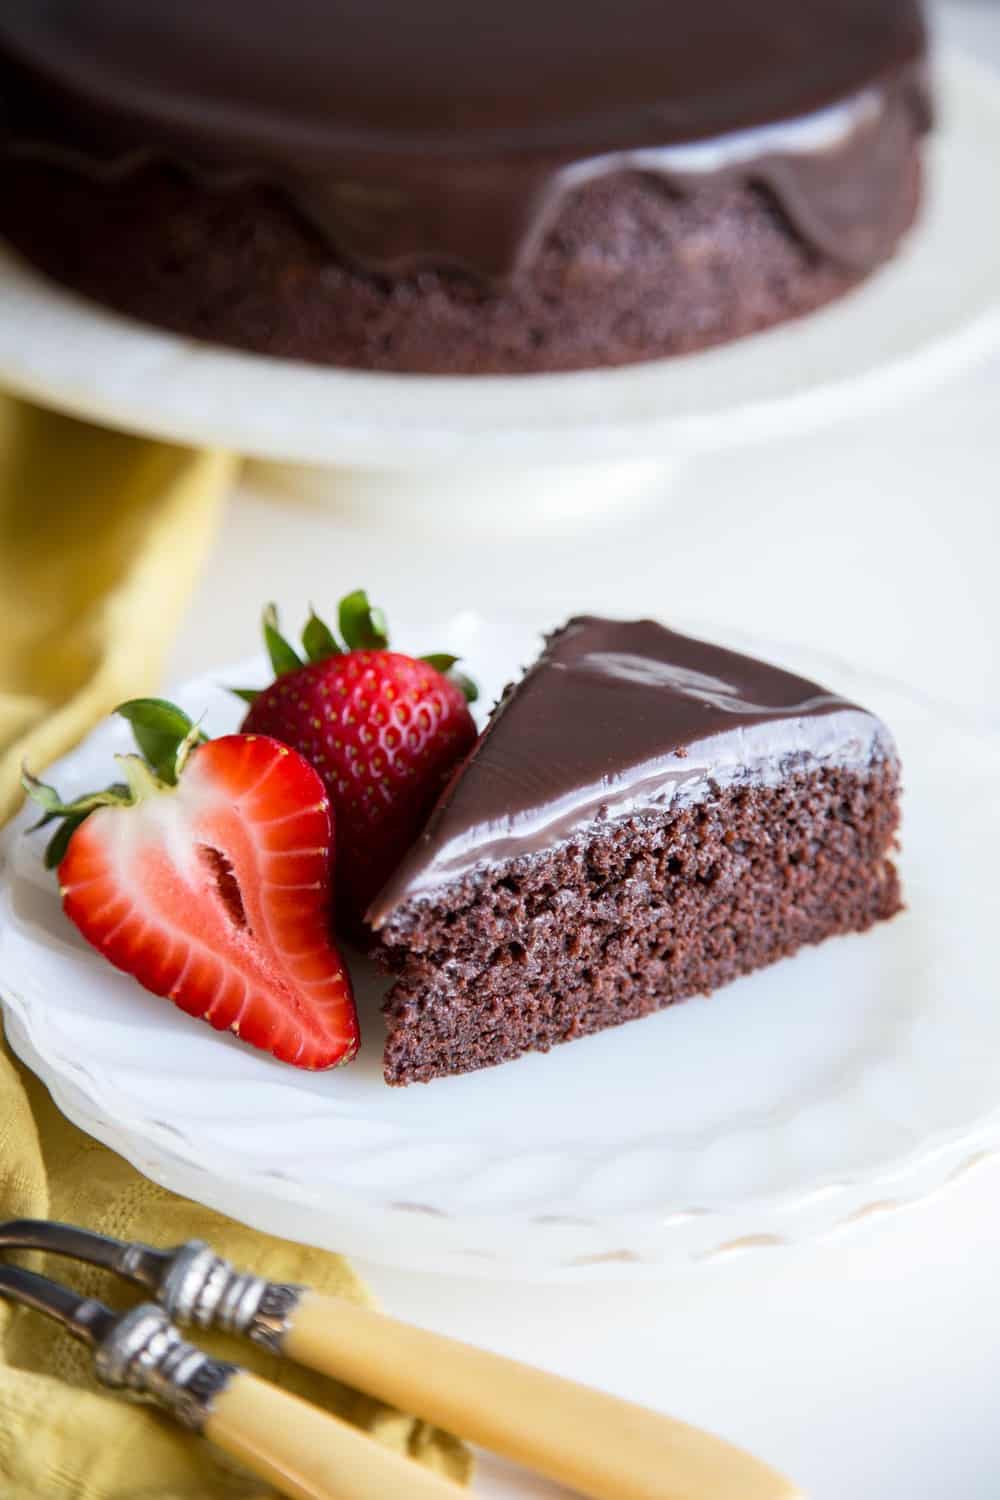 A slice of chocolate cake on a plate with strawberries